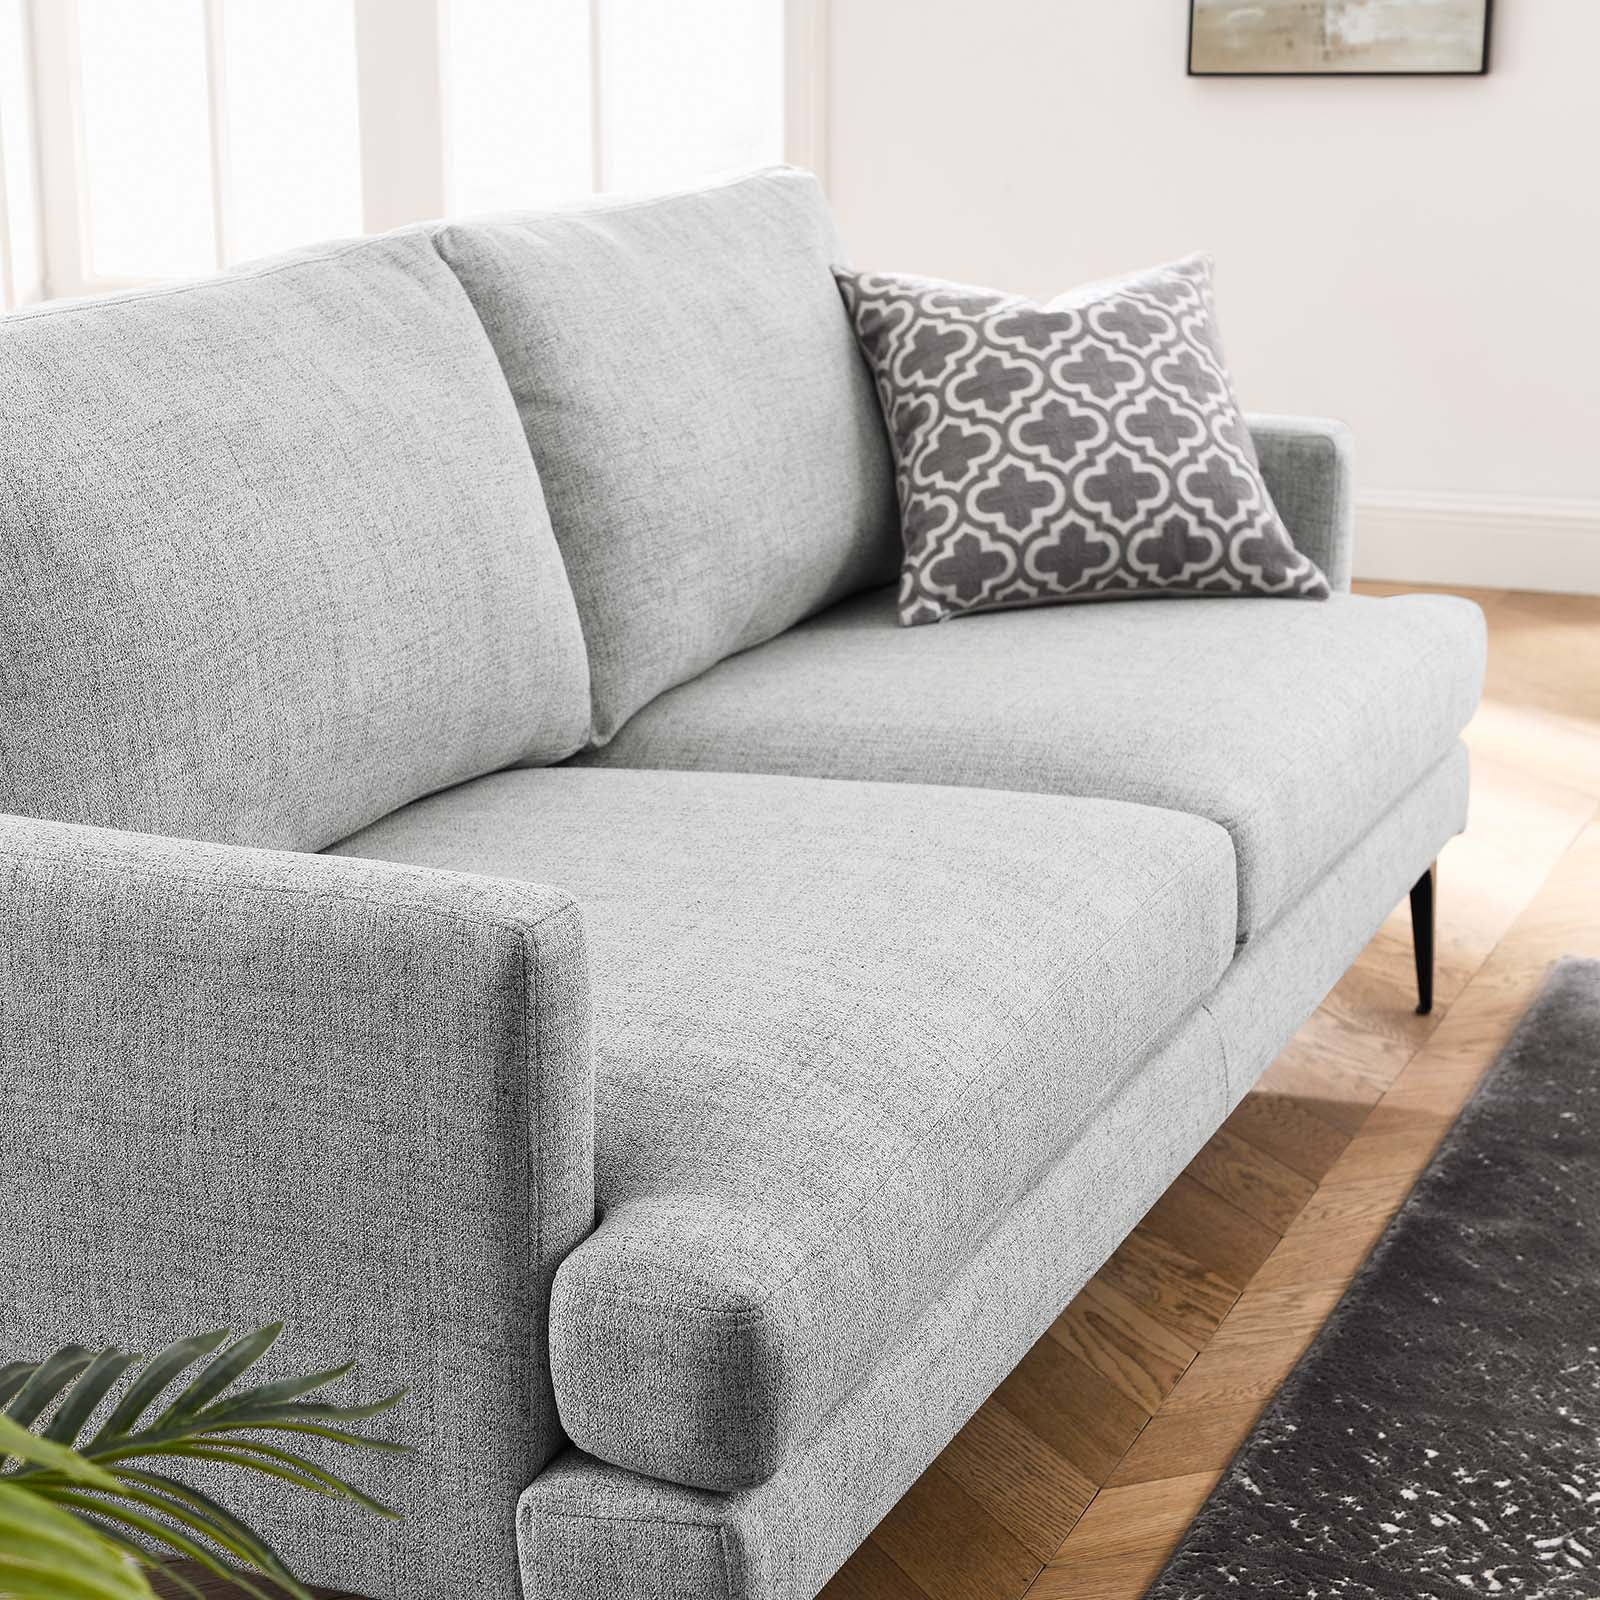 Evermore Upholstered Fabric Sofa - East Shore Modern Home Furnishings